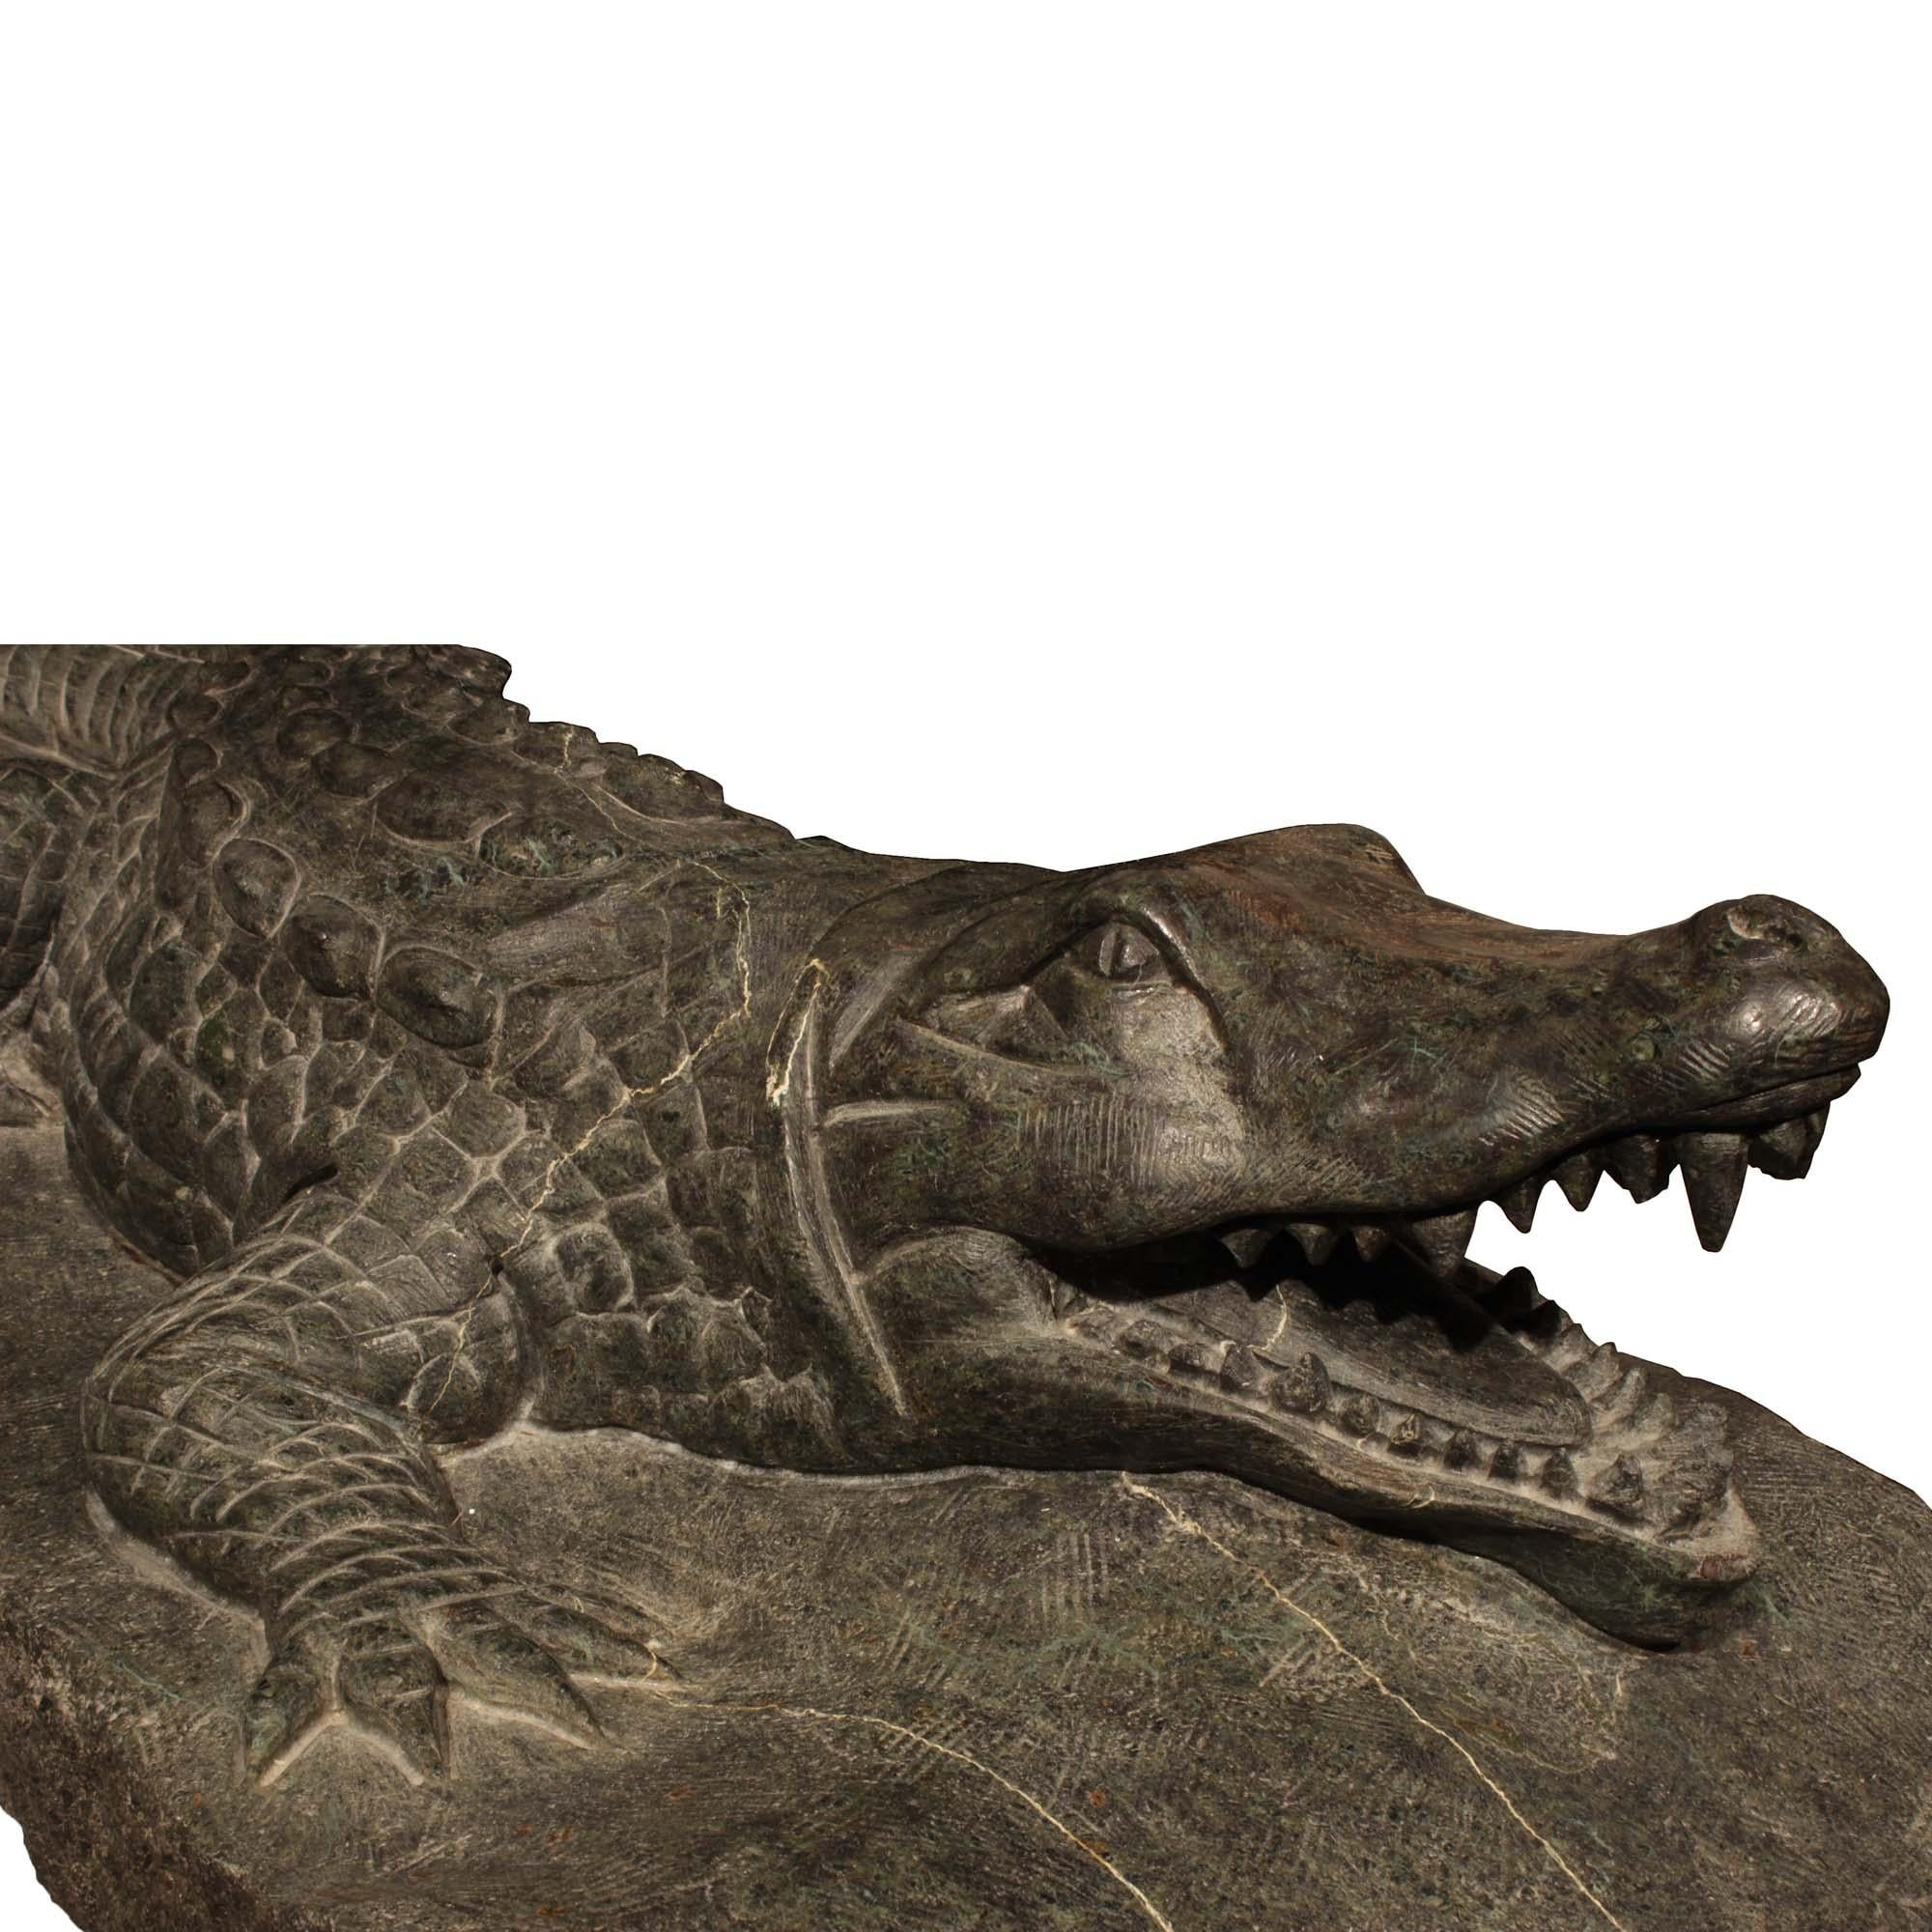 A magnificent Italian 19th century Verde Prato marble Alligator sculpture, from Florence. This exceptionally well executed marble sculpture is raised on a terrain styled base. The very impressive and intricately carved marble alligator is depicted